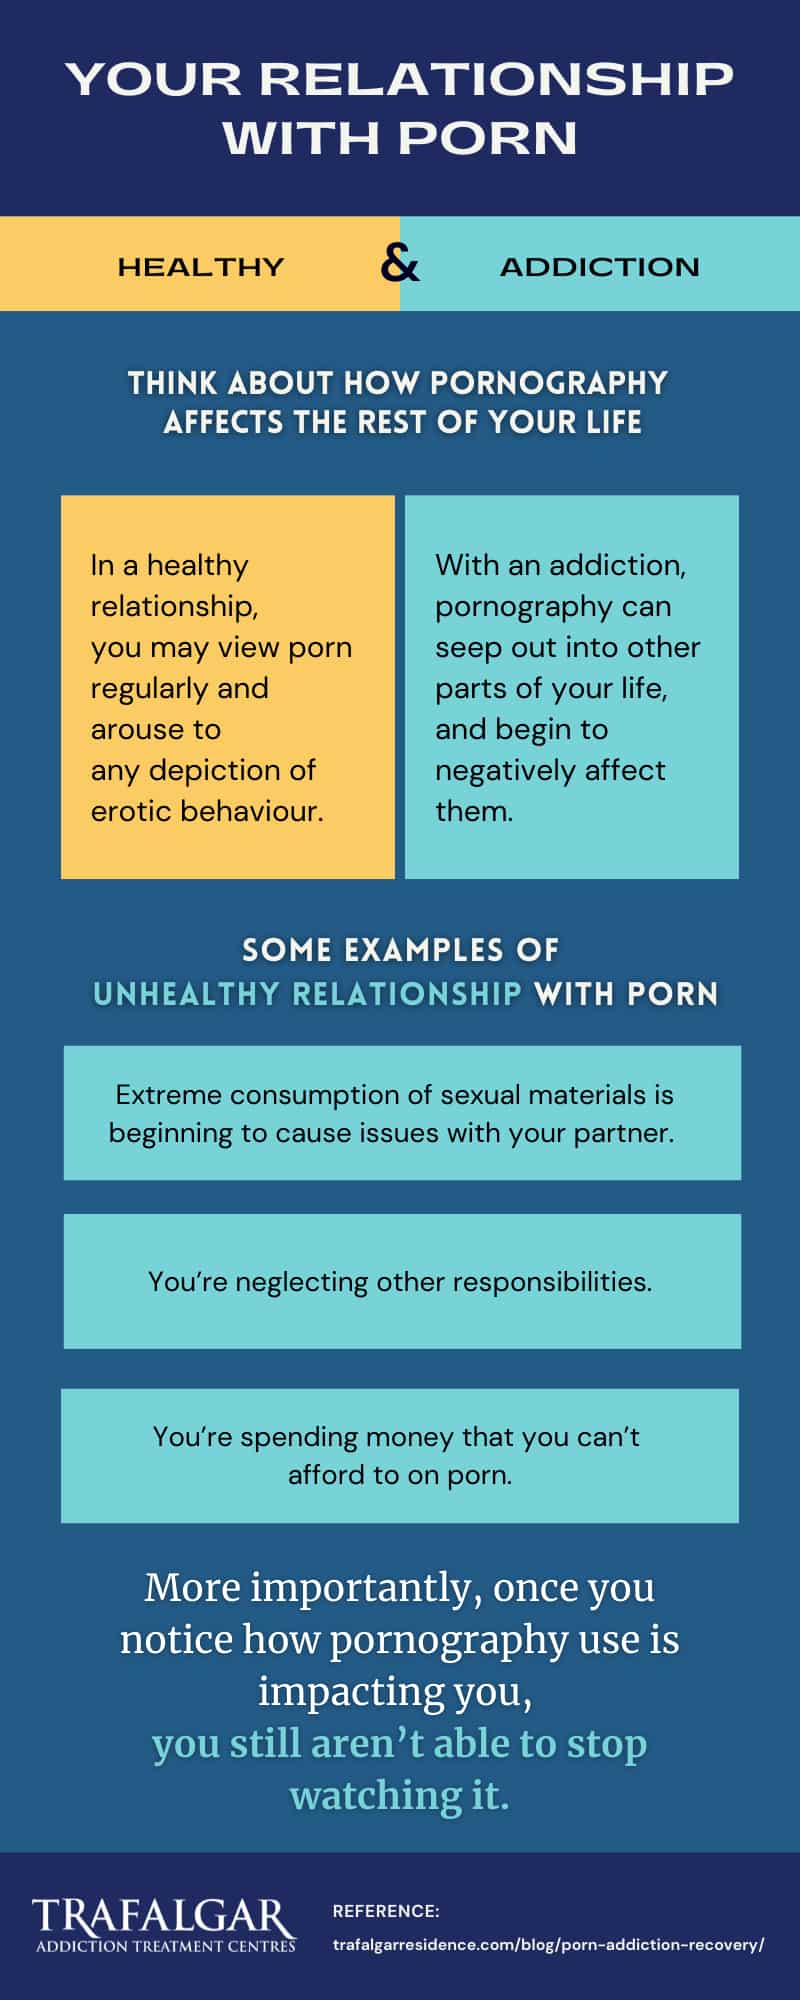 An infographic about the difference between healthy relationship with porn and an addiction.